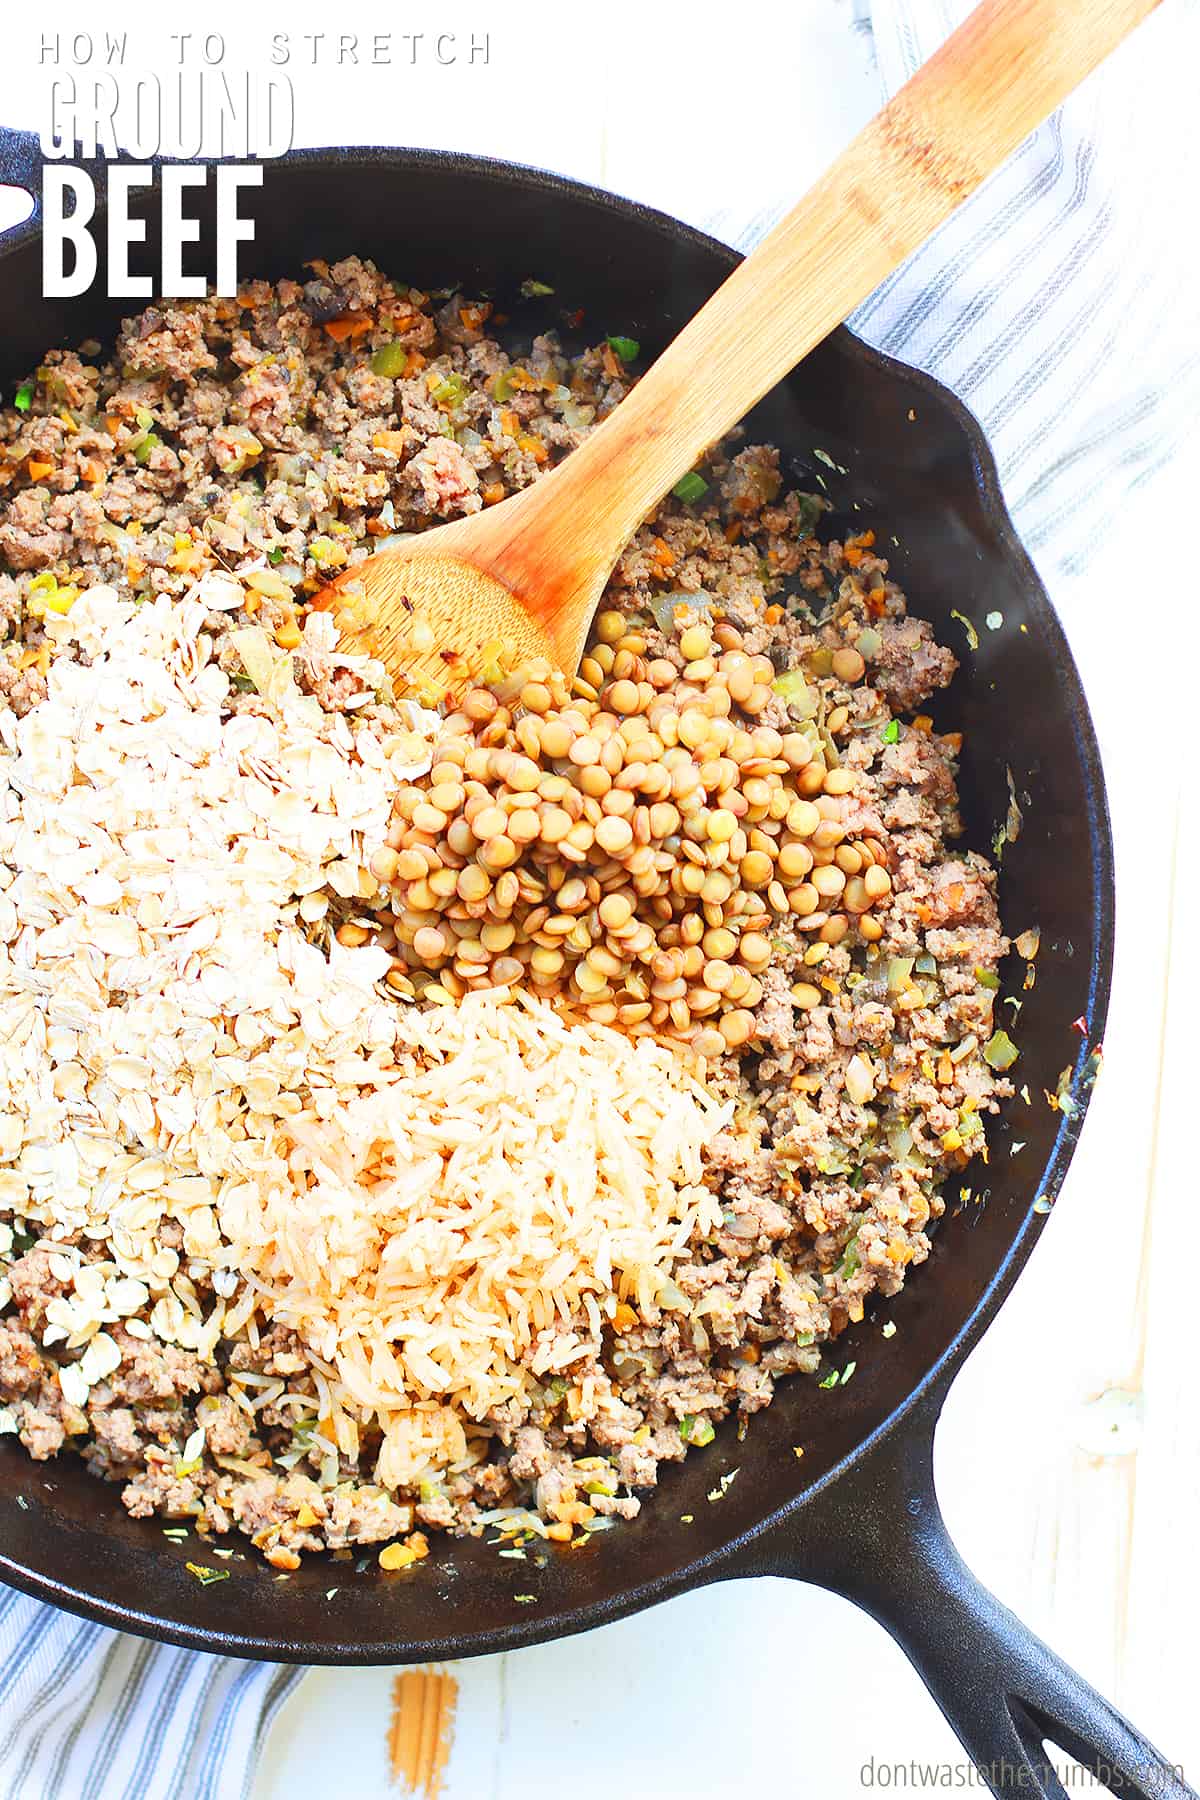 Image shows ground beef cooking in a skillet with lentils, rolled oats, and veggies with a wooden spoon stirring the ingredients. Text overlay reads How to Stretch Ground Beef